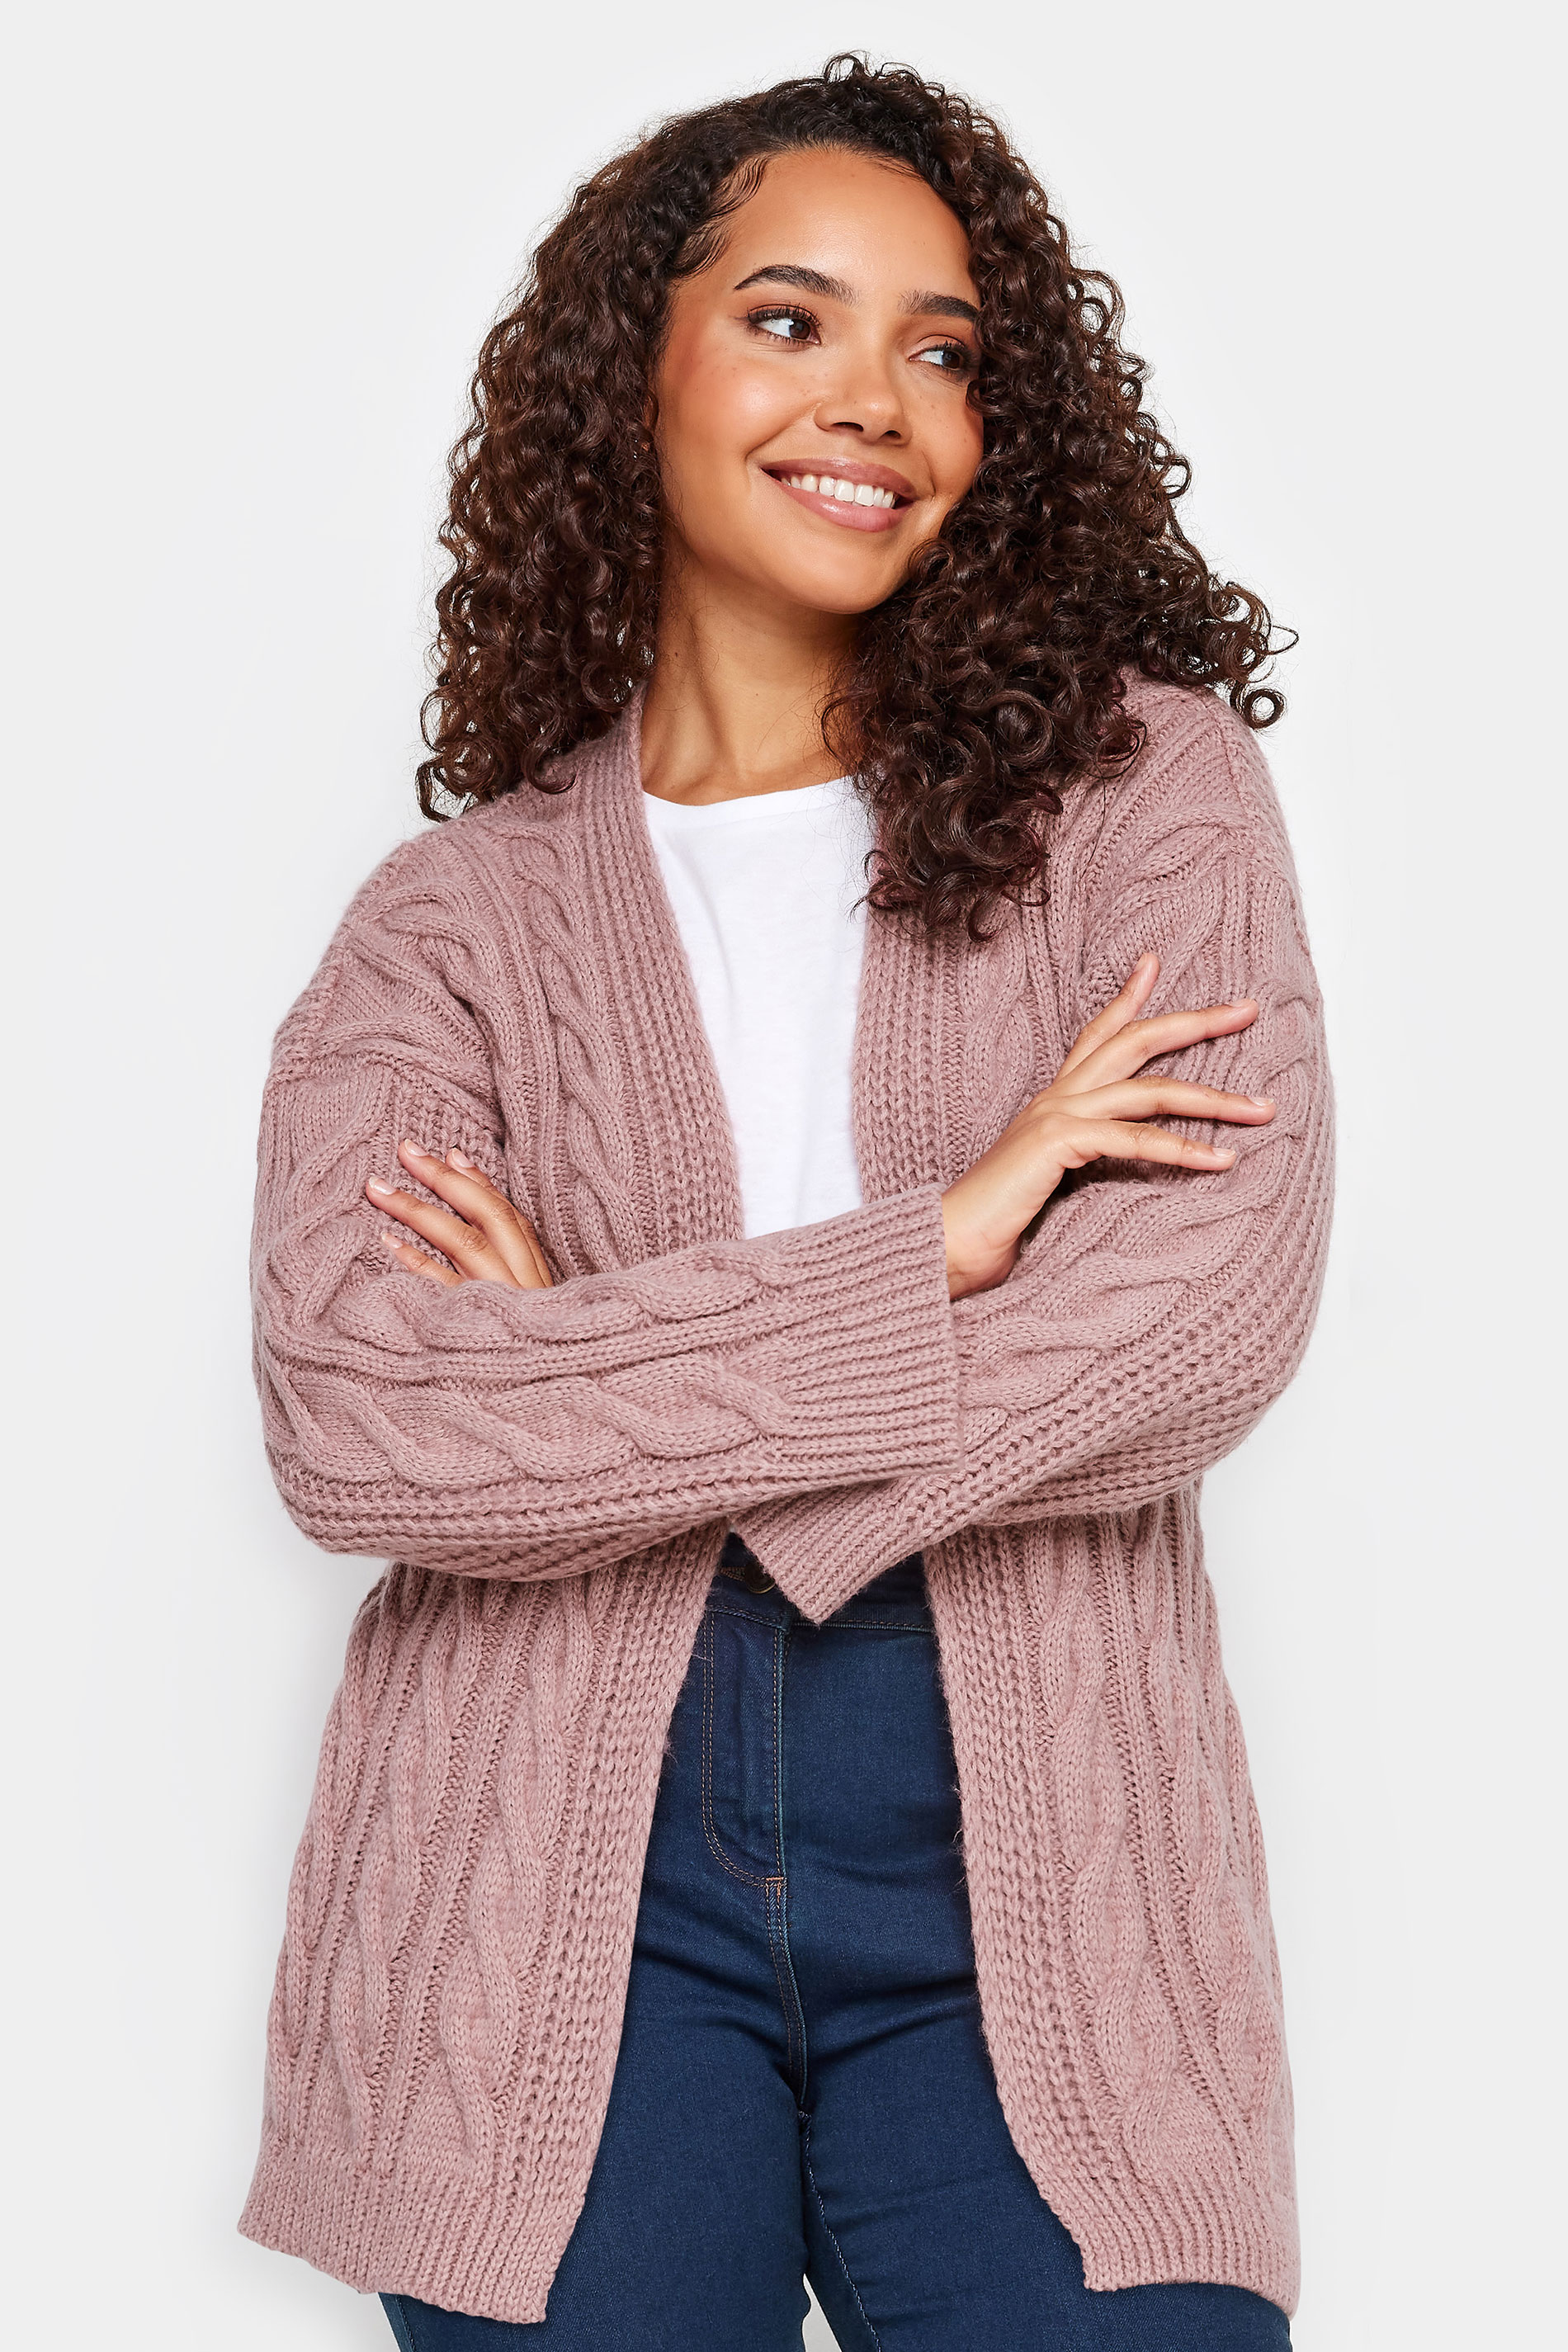 M&Co Petite Pink Chunky Cable Knit Cardigan | M&Co 1